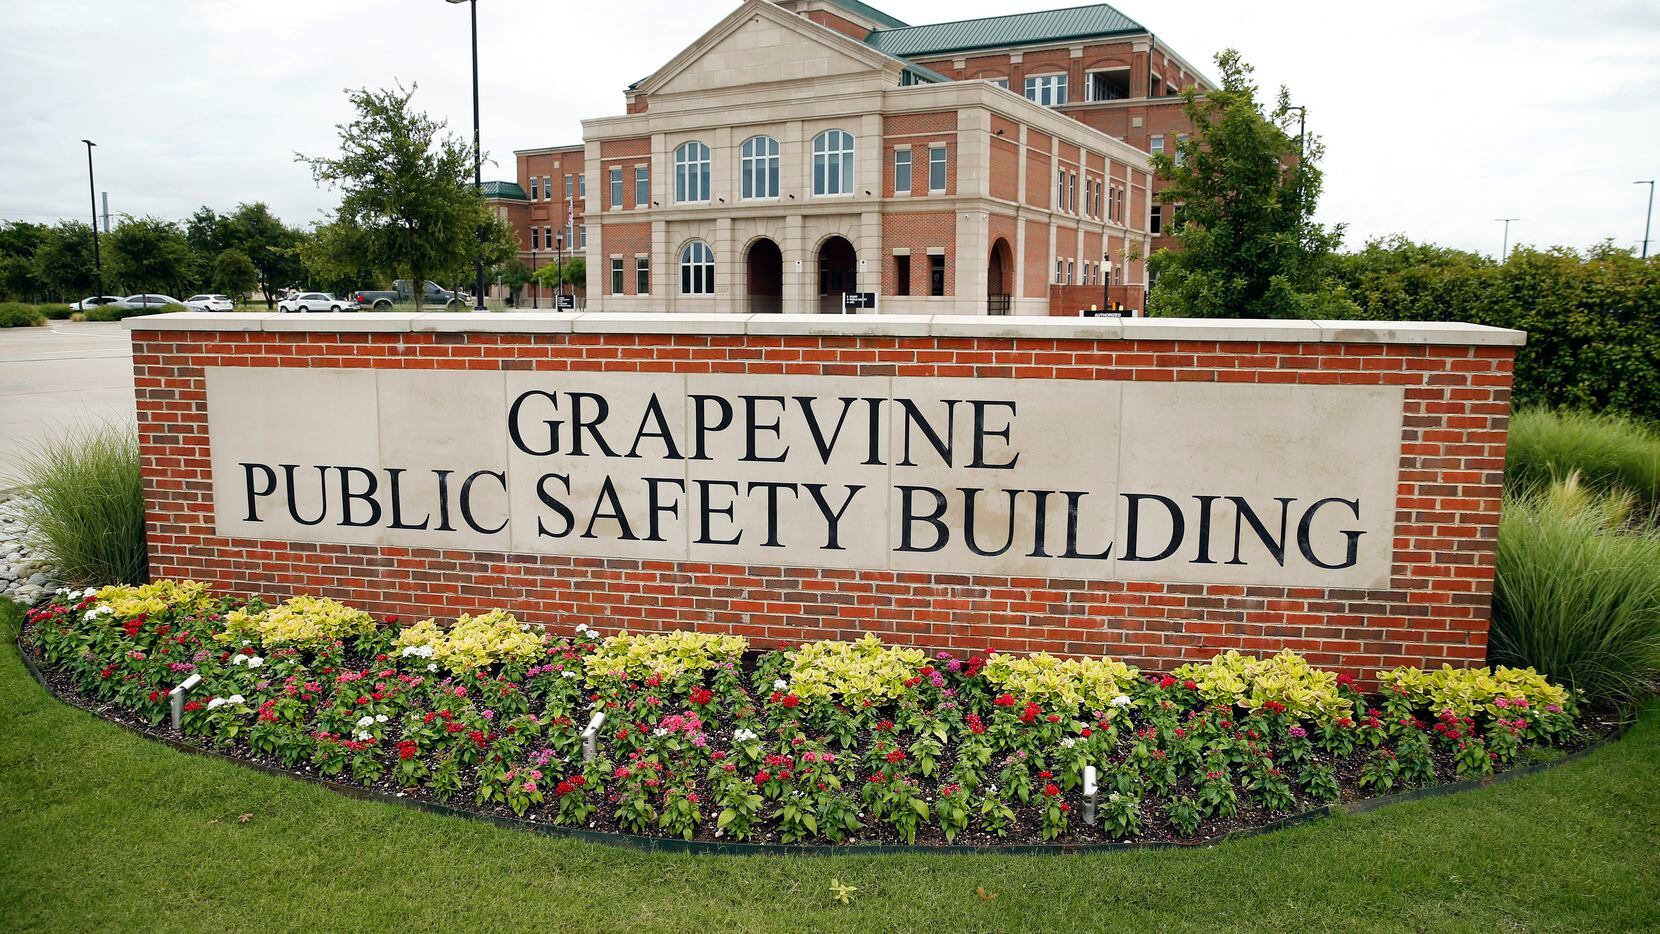 An exterior view of the Grapevine Public Safety Building in Grapevine, Texas, Tuesday, June 23, 2020. The three buildings on site house the Police Department, Fire Administration, Courts, Information Technology Department and Logistics. (Tom Fox/The Dallas Morning News)